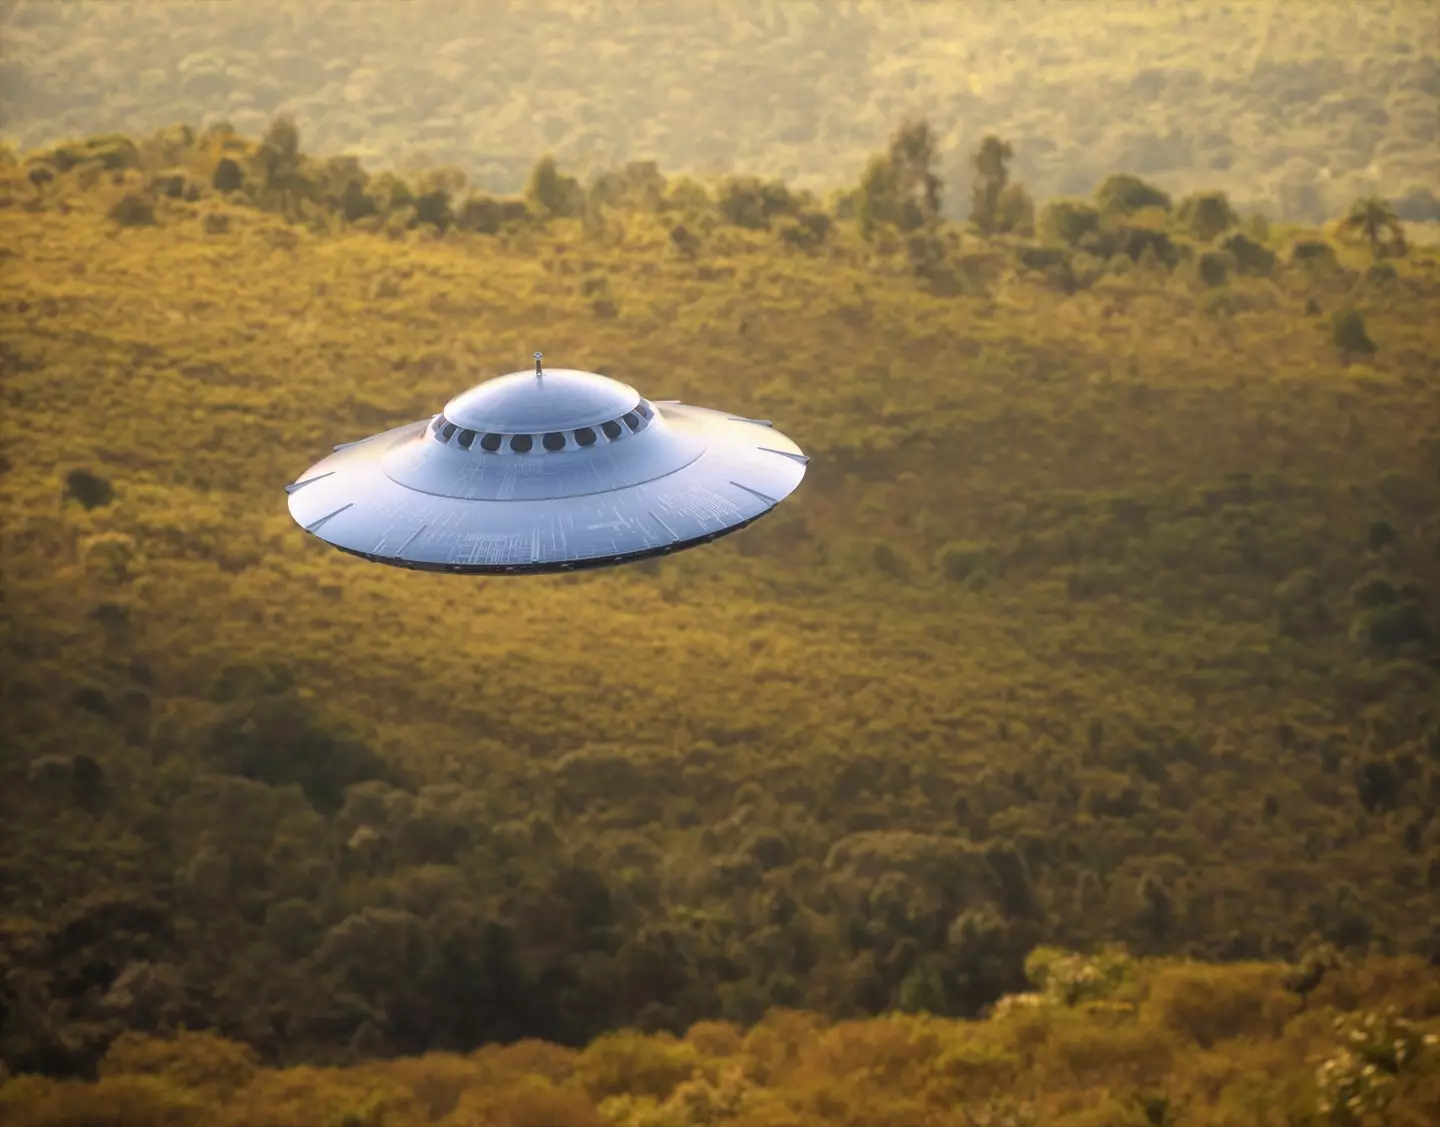 Apparently the US military has recovered some UFOs, and sometimes they had aliens inside them.